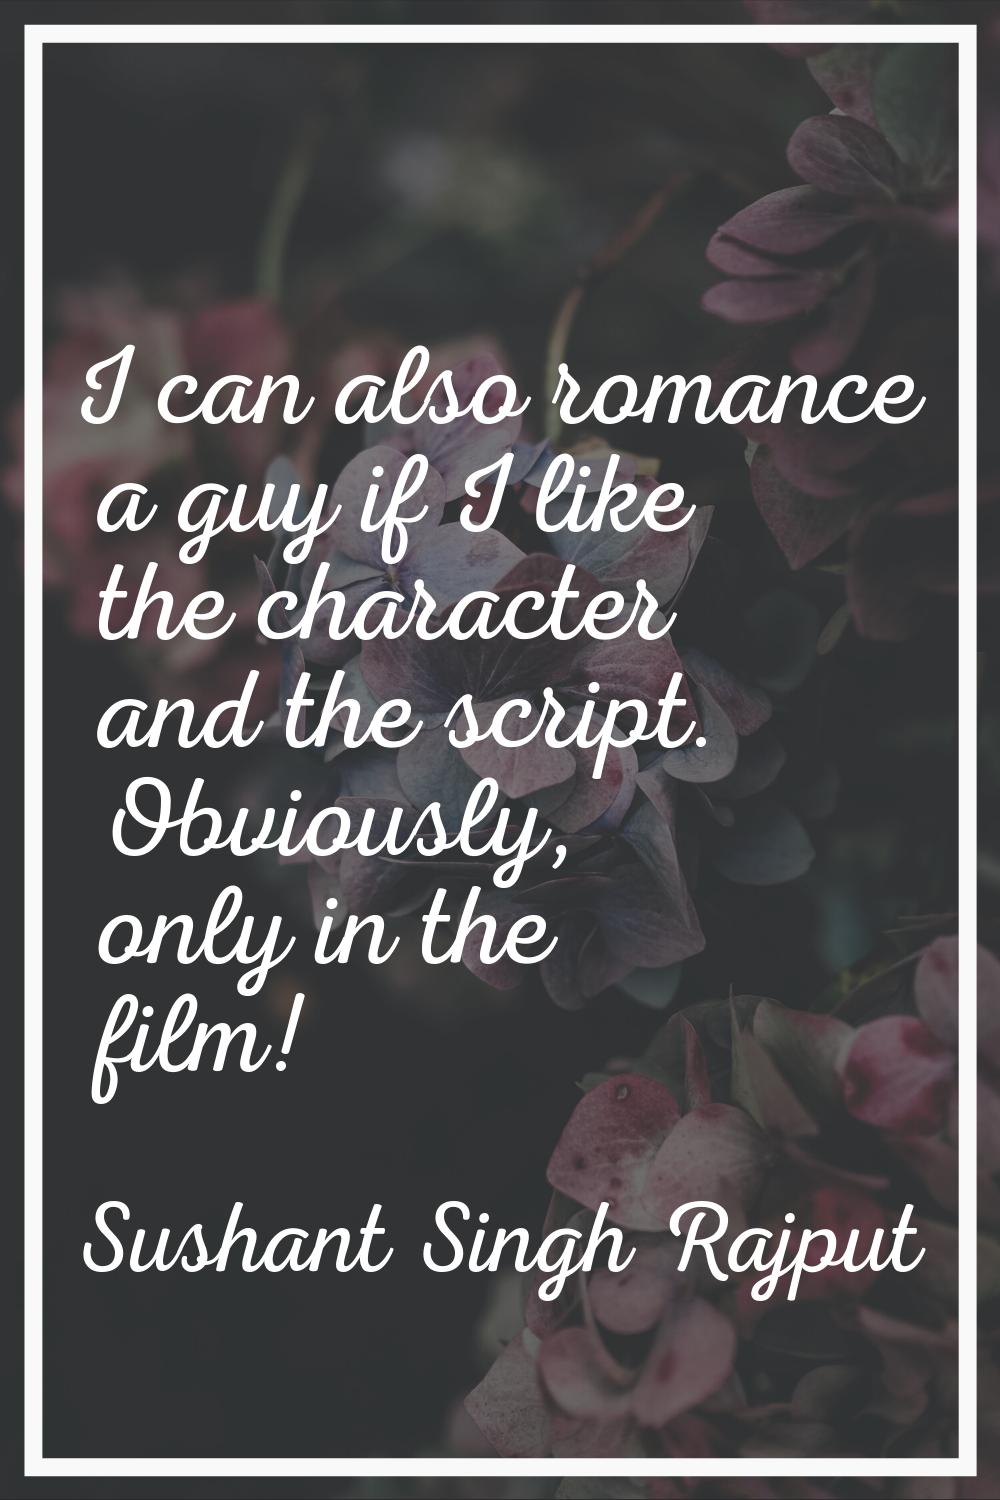 I can also romance a guy if I like the character and the script. Obviously, only in the film!